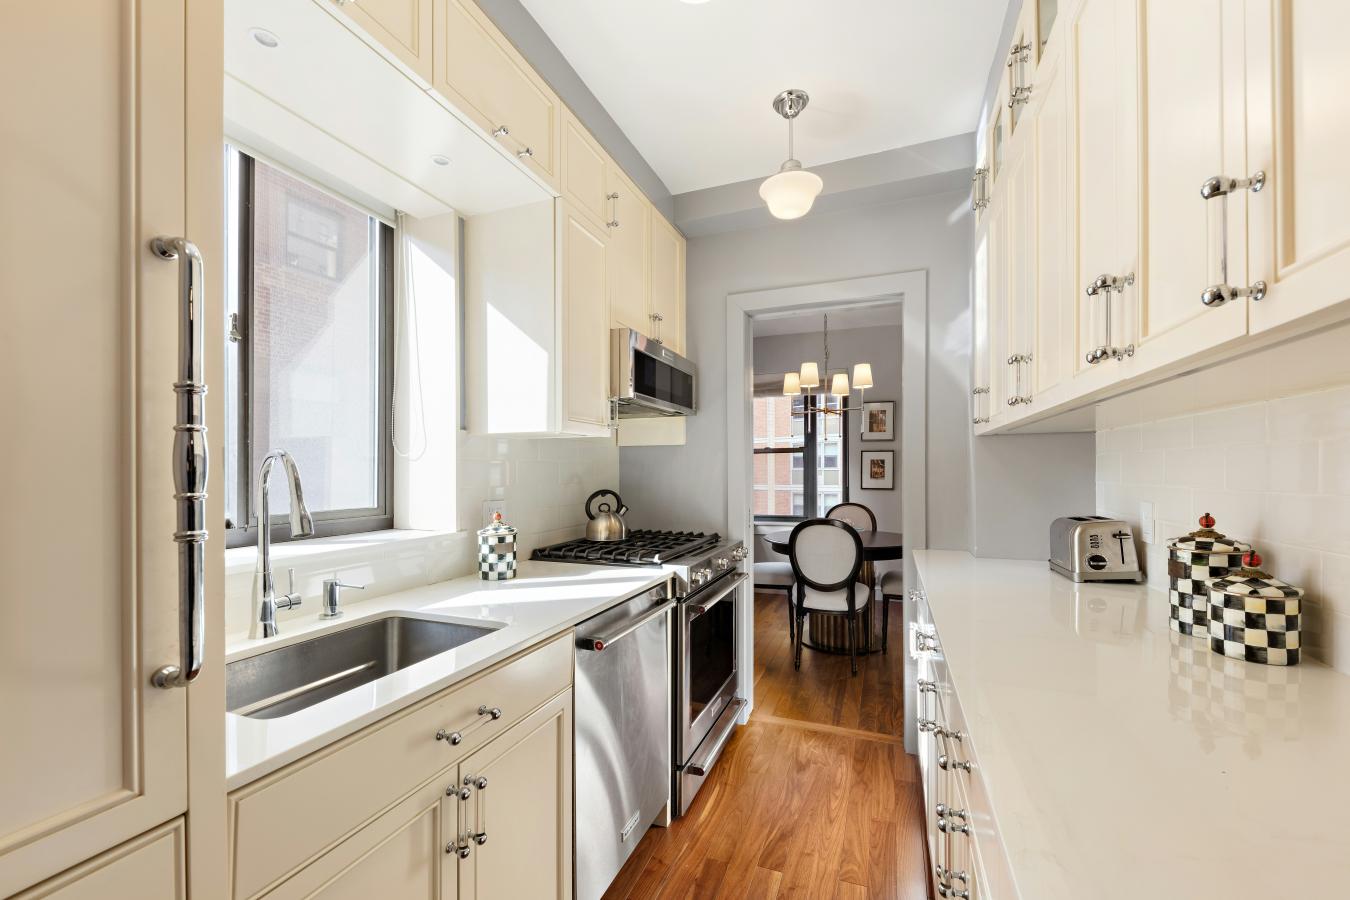 440 East 56th Street, New York, New York, 10022, United States, 2 Bedrooms Bedrooms, ,2 BathroomsBathrooms,Residential,For Sale,440 East 56th Street,1508149